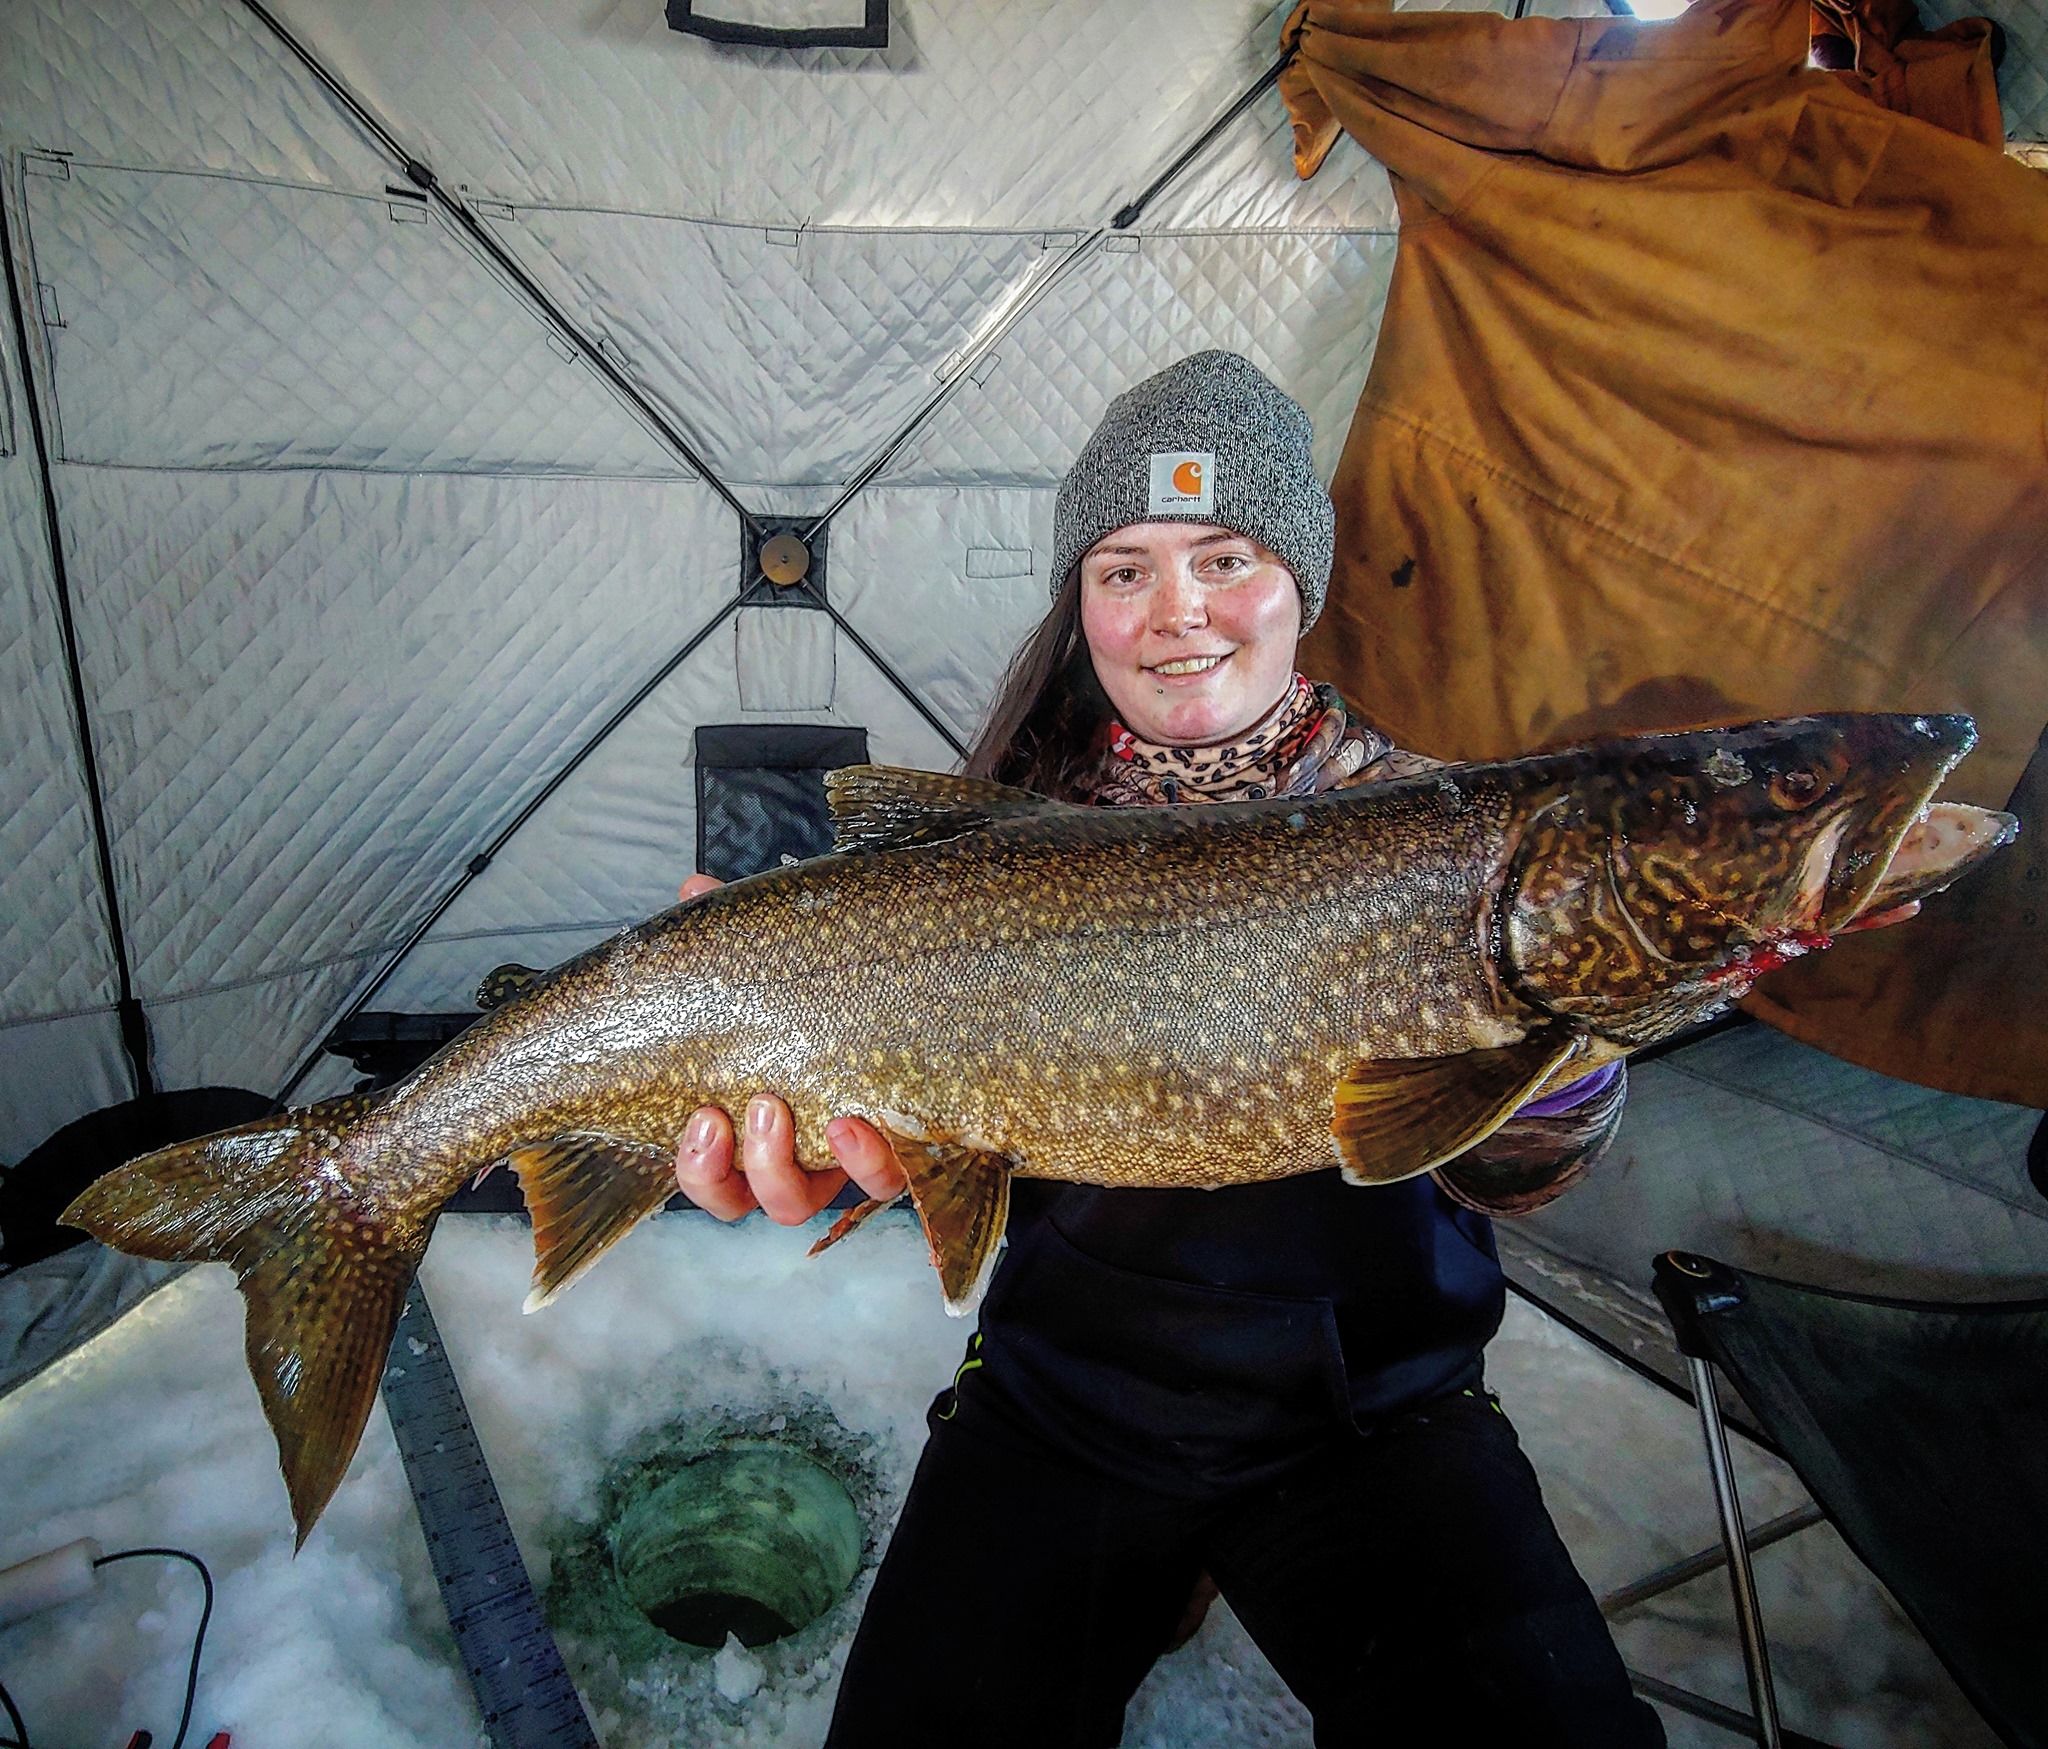 Ice fishing for lakers worth facing frigid temperatures and broken